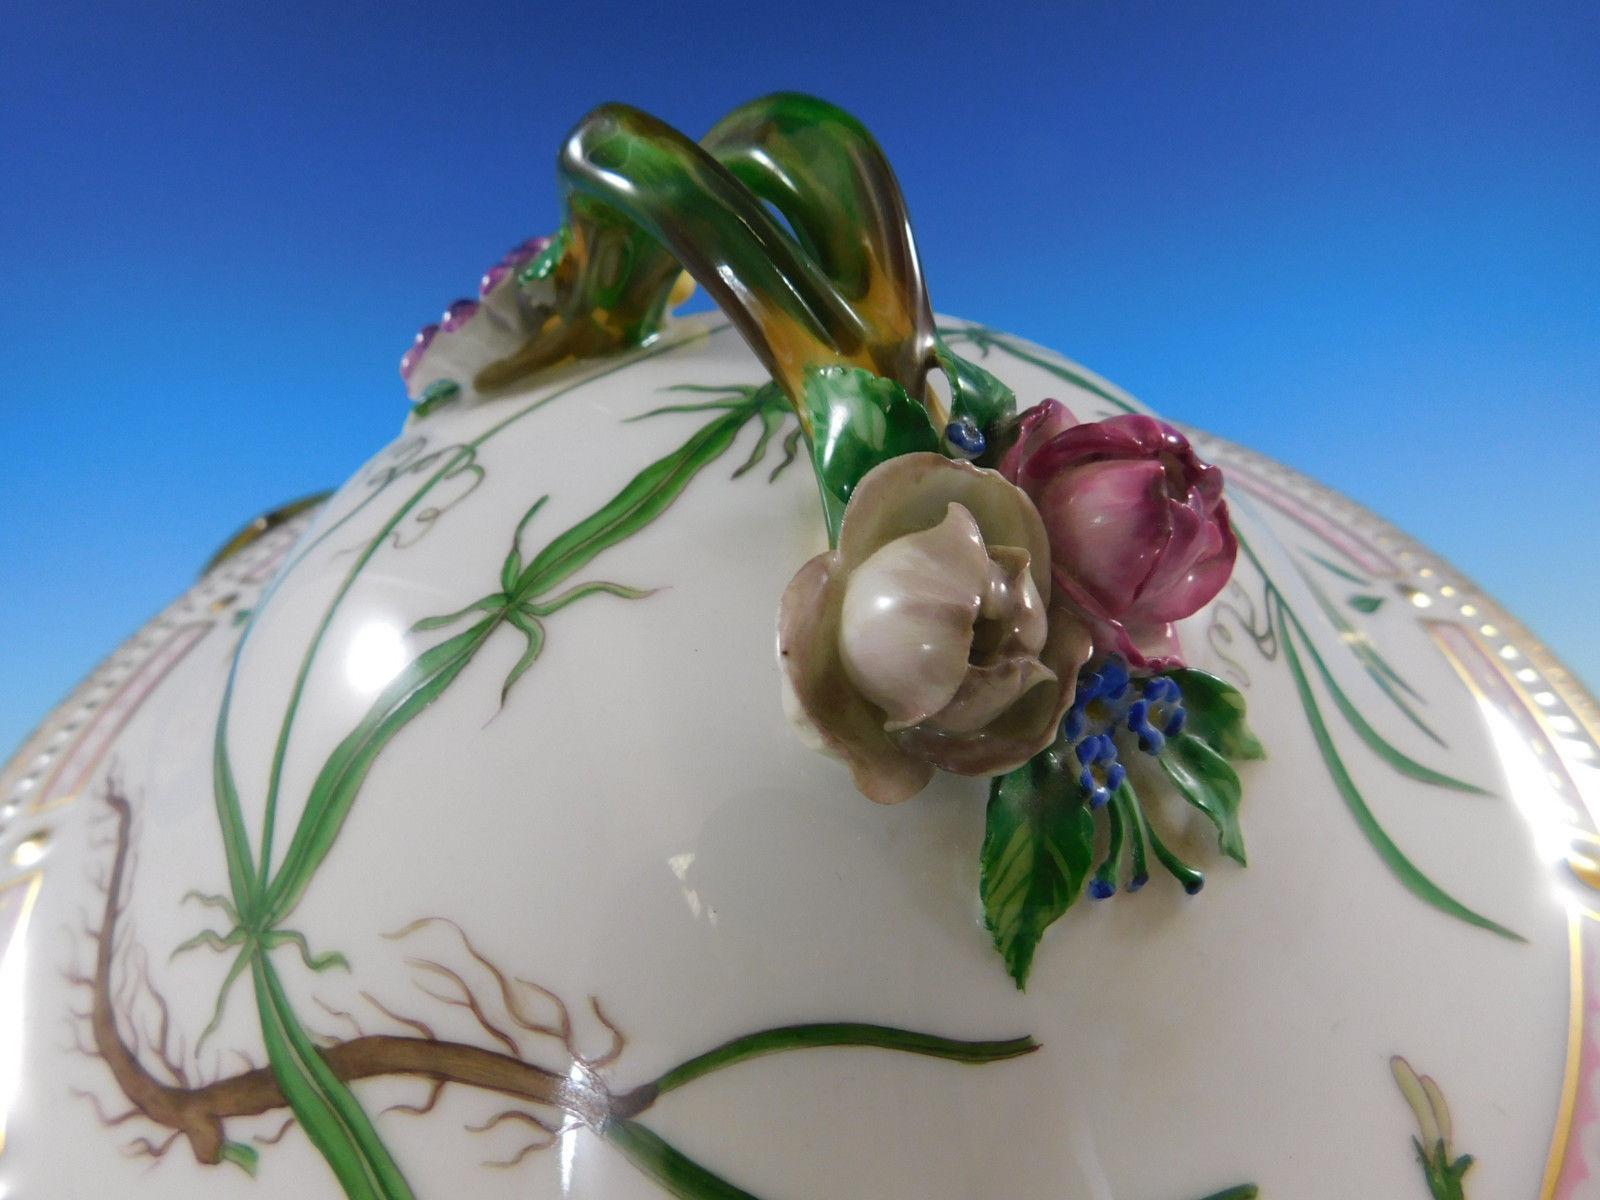 Flora Danica porcelain
This impressive estate porcelain covered soup tureen with under plate has naturalistic pink flowers on the body and underplate as well as branch handles with three-dimensional applied flowers. It is in excellent condition with